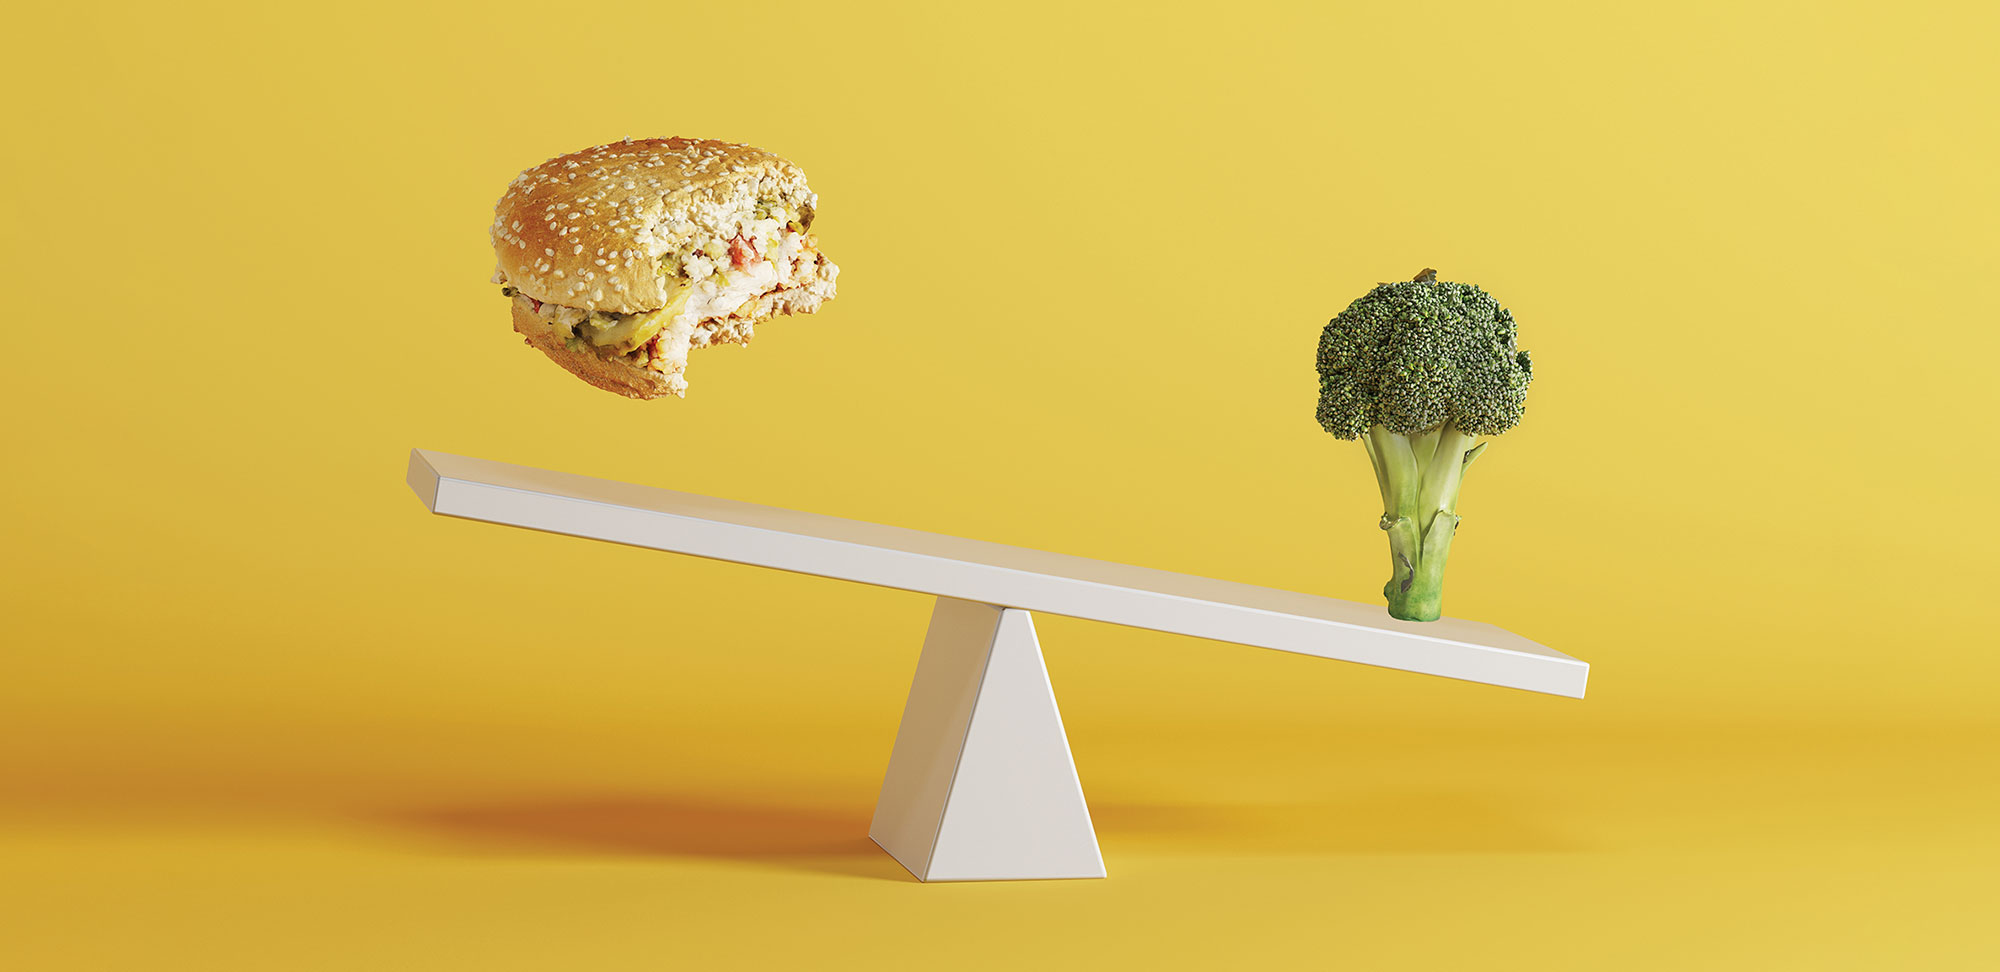 Photo of broccoli vegetable tipping seesaw with floating berger on opposite end on yellow background.